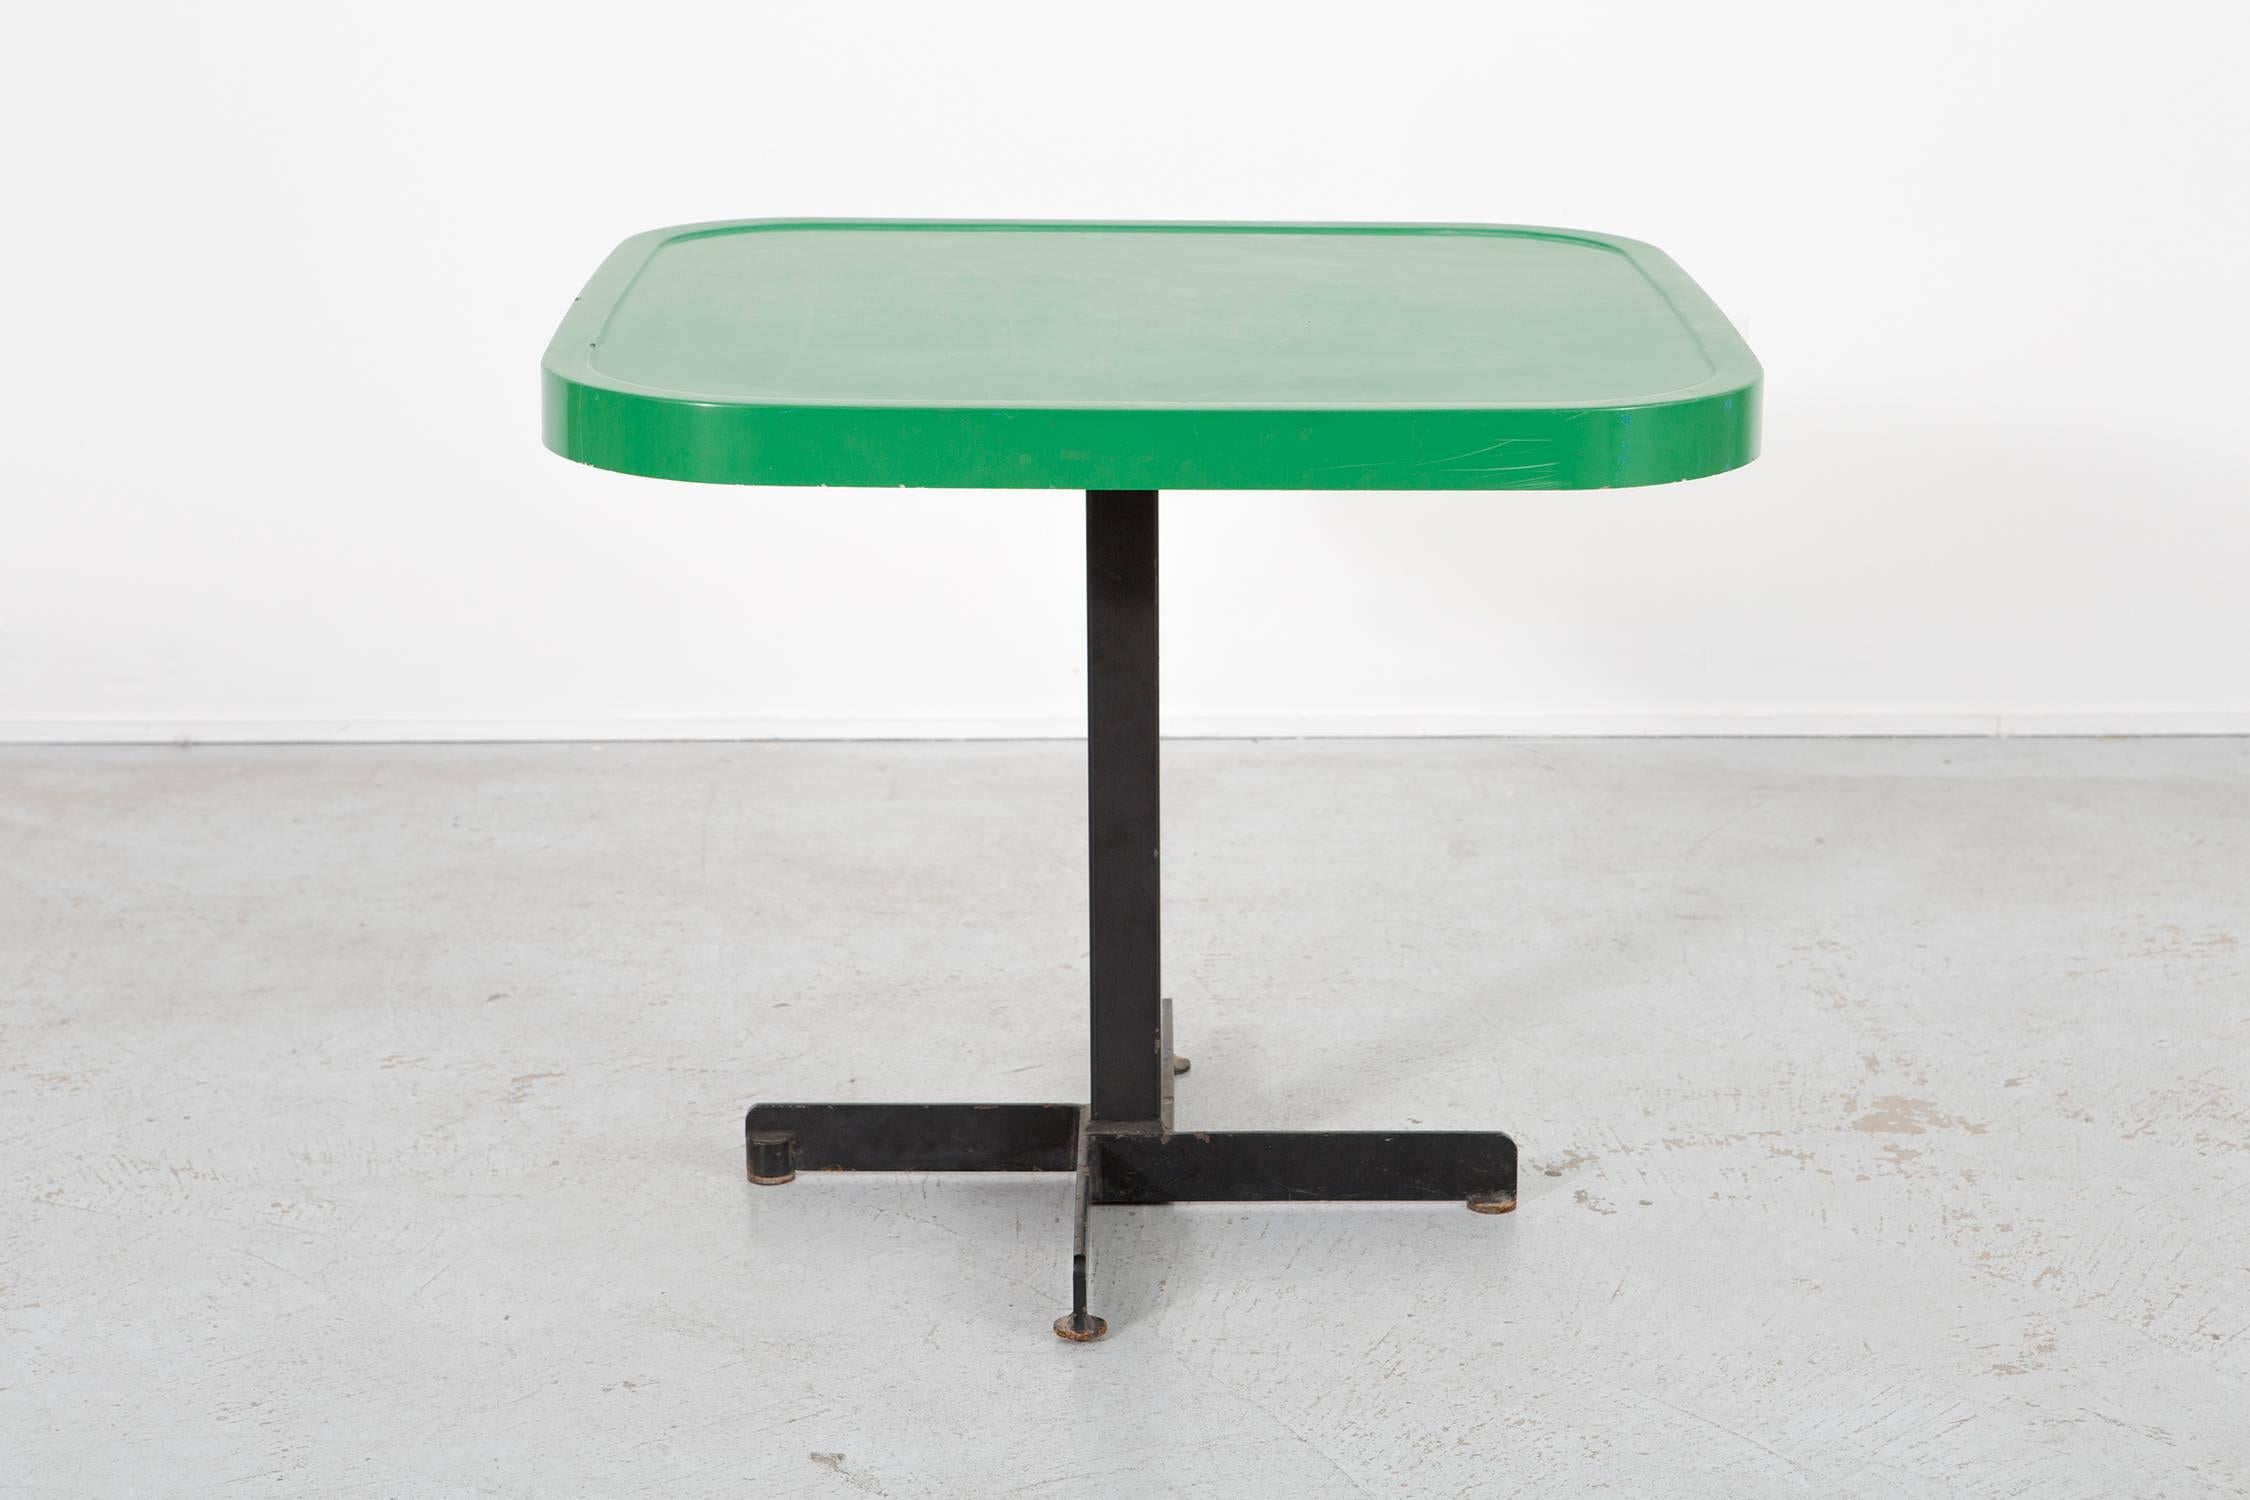 Green table

Designed by Charlotte Perriand for Les Arcs

France, circa 1960s

Enameled metal

Measures: 25 ?” H x 30 ?” W x 30 ?” D.